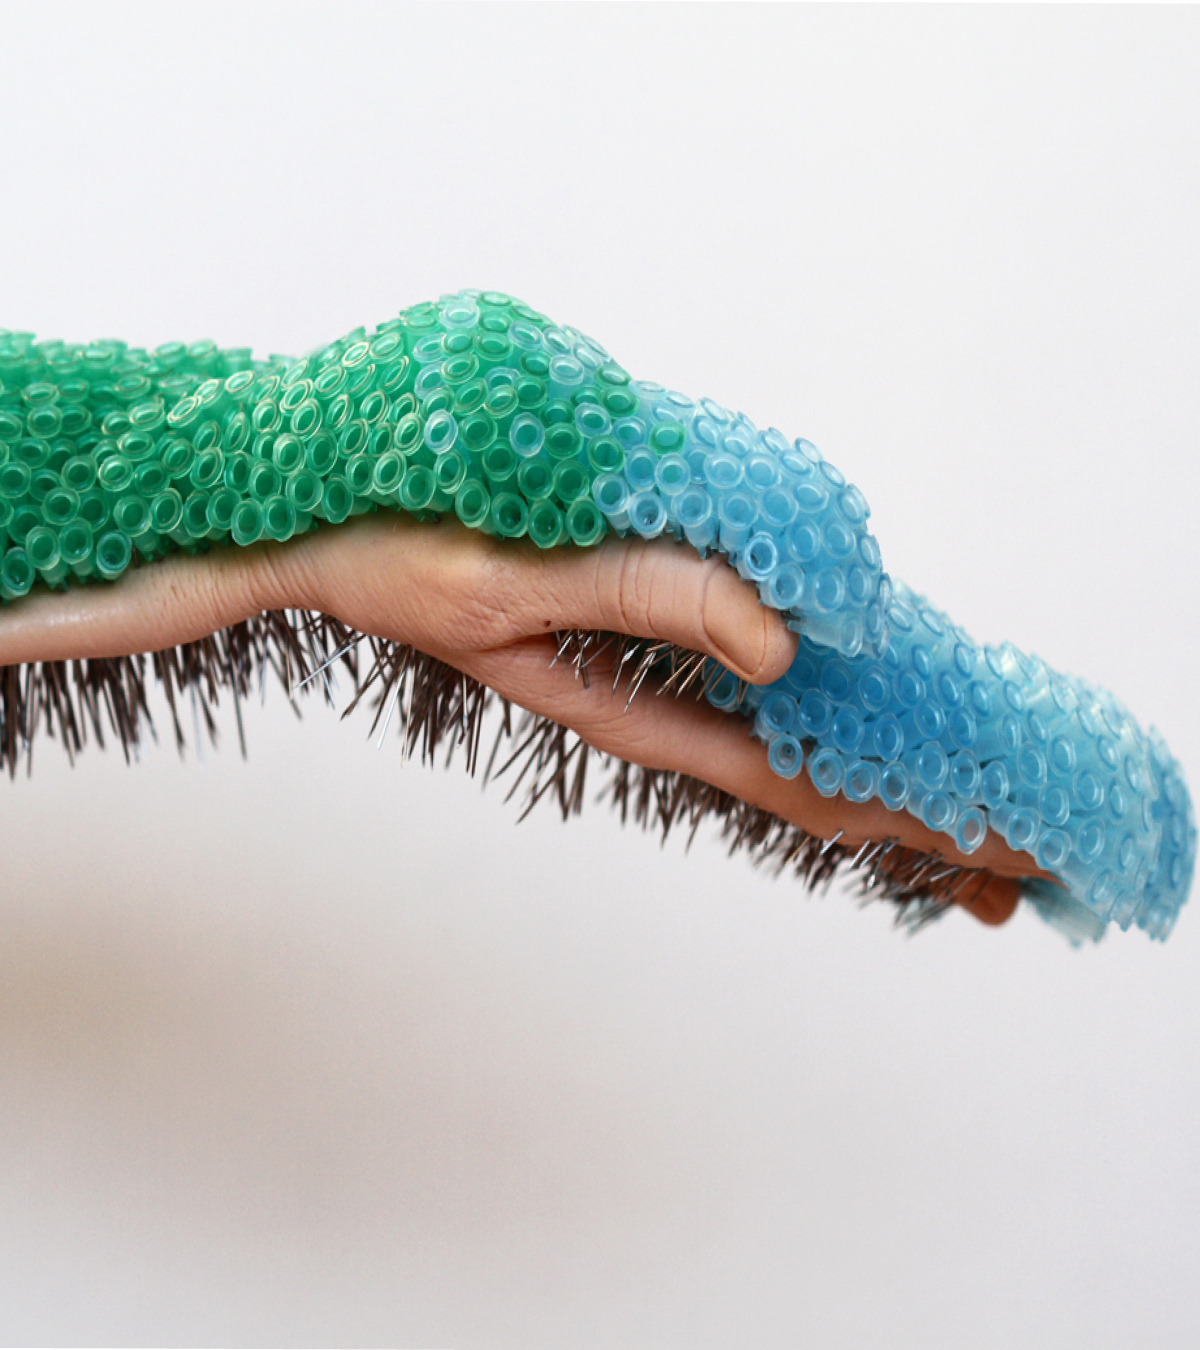 Hand extended horizontally across a plain background, holding hundreds of green and blue needles